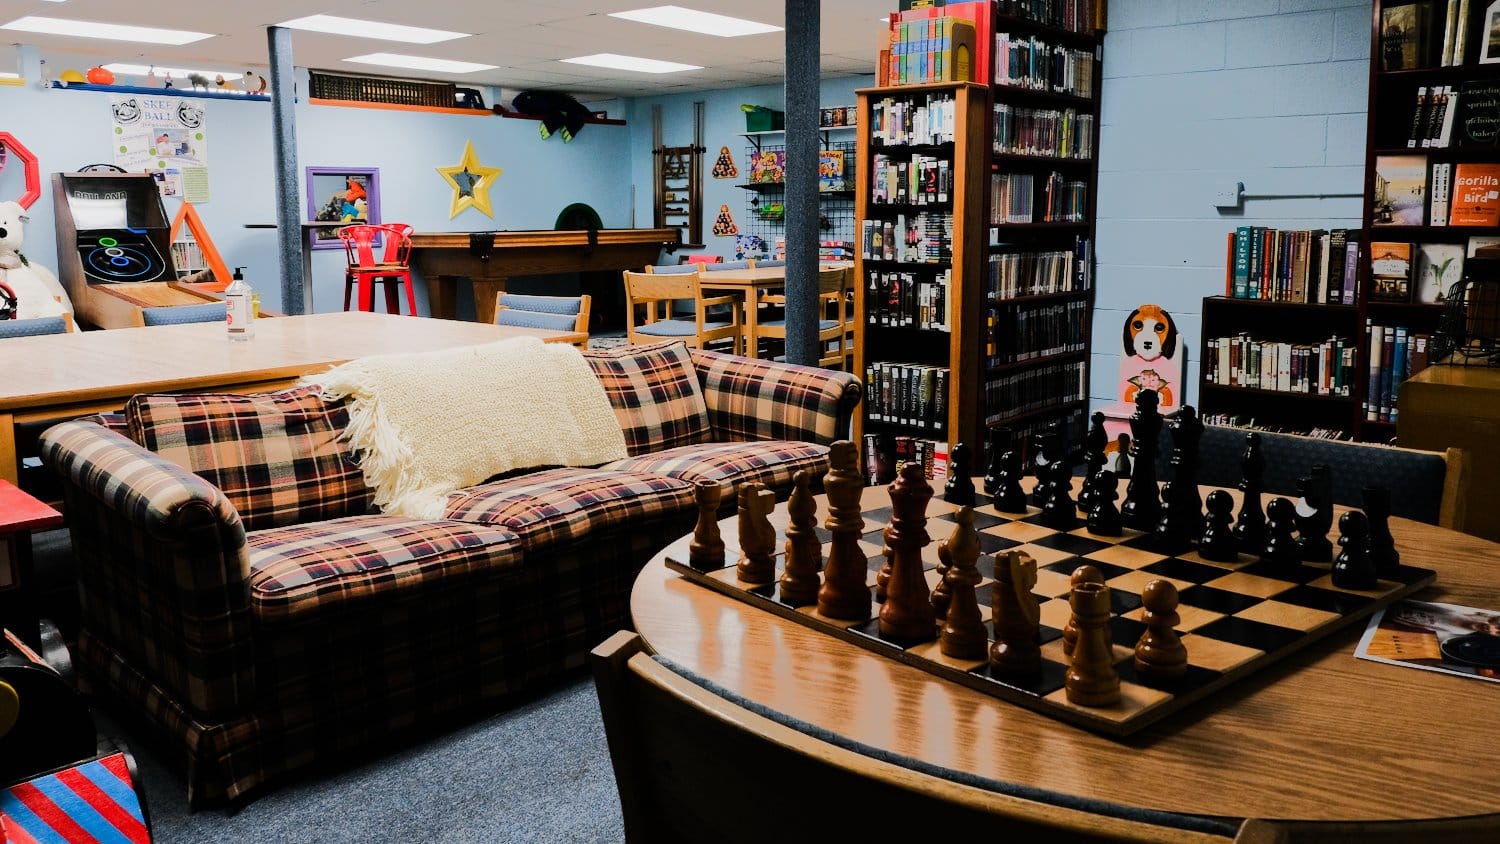 The basement room in the library is more about fun, games, and hanging out.